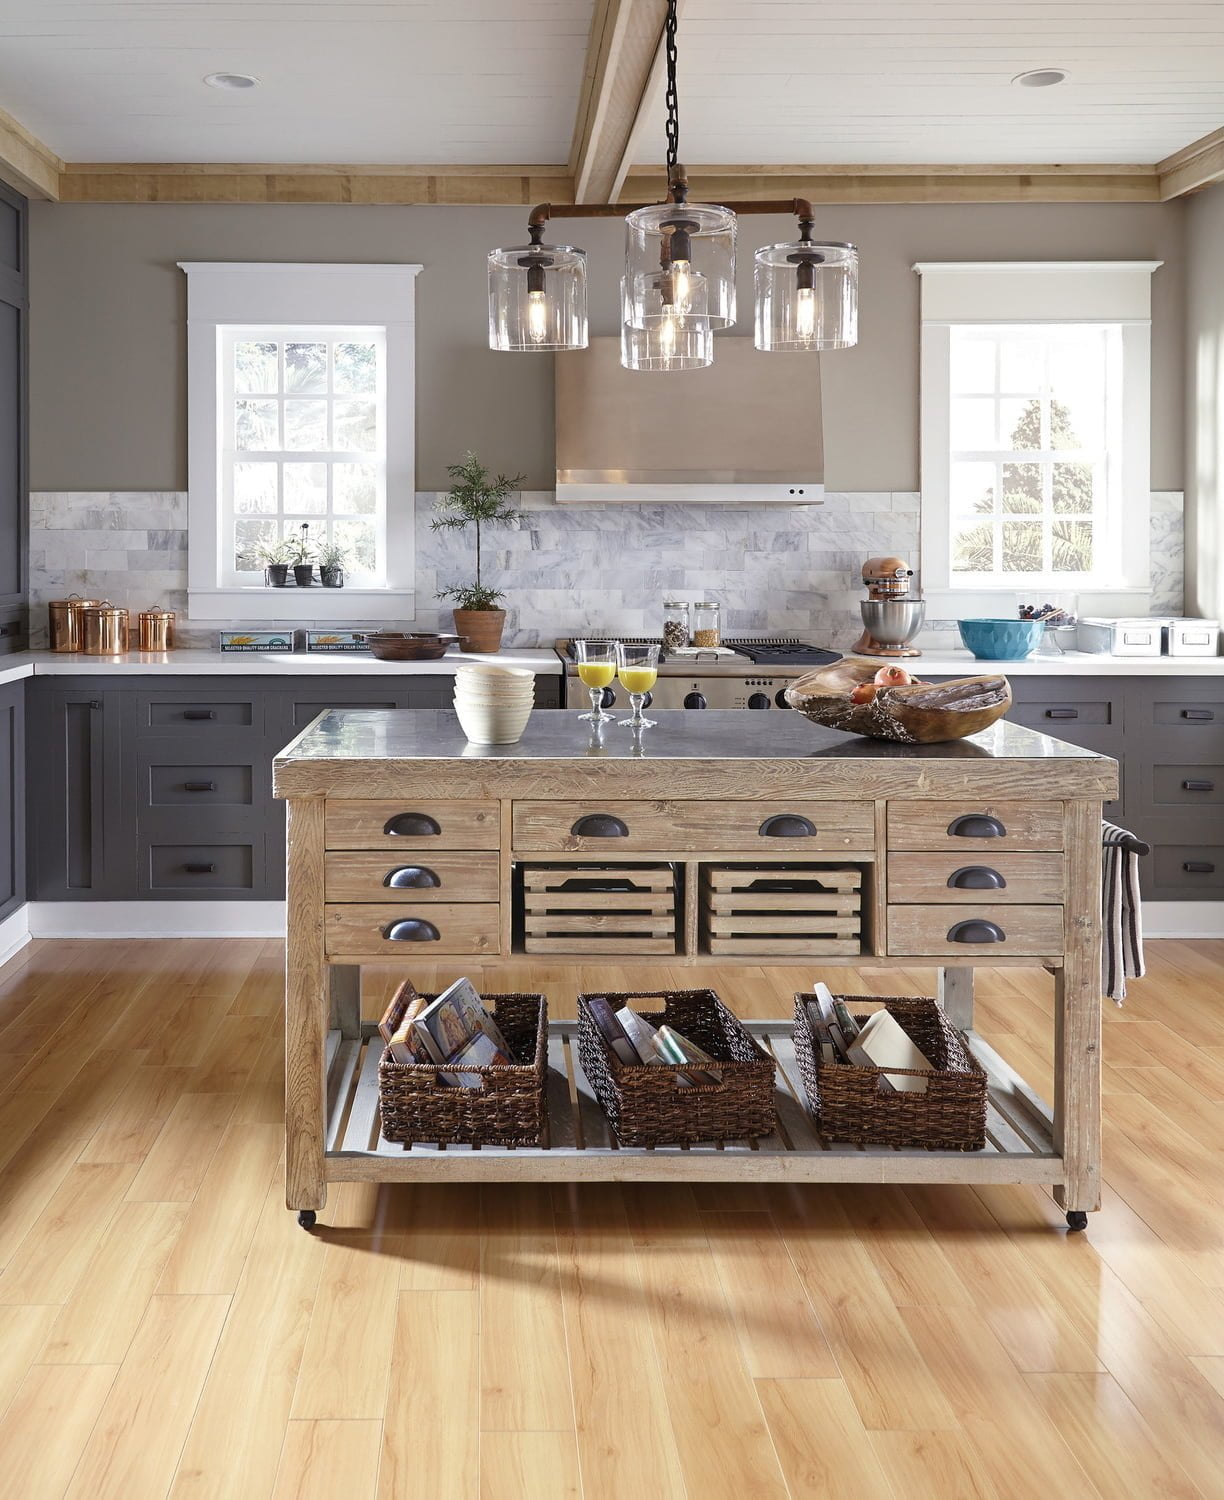 10 A Few Of Your Favourite Things Kitchen Island Homebnc 